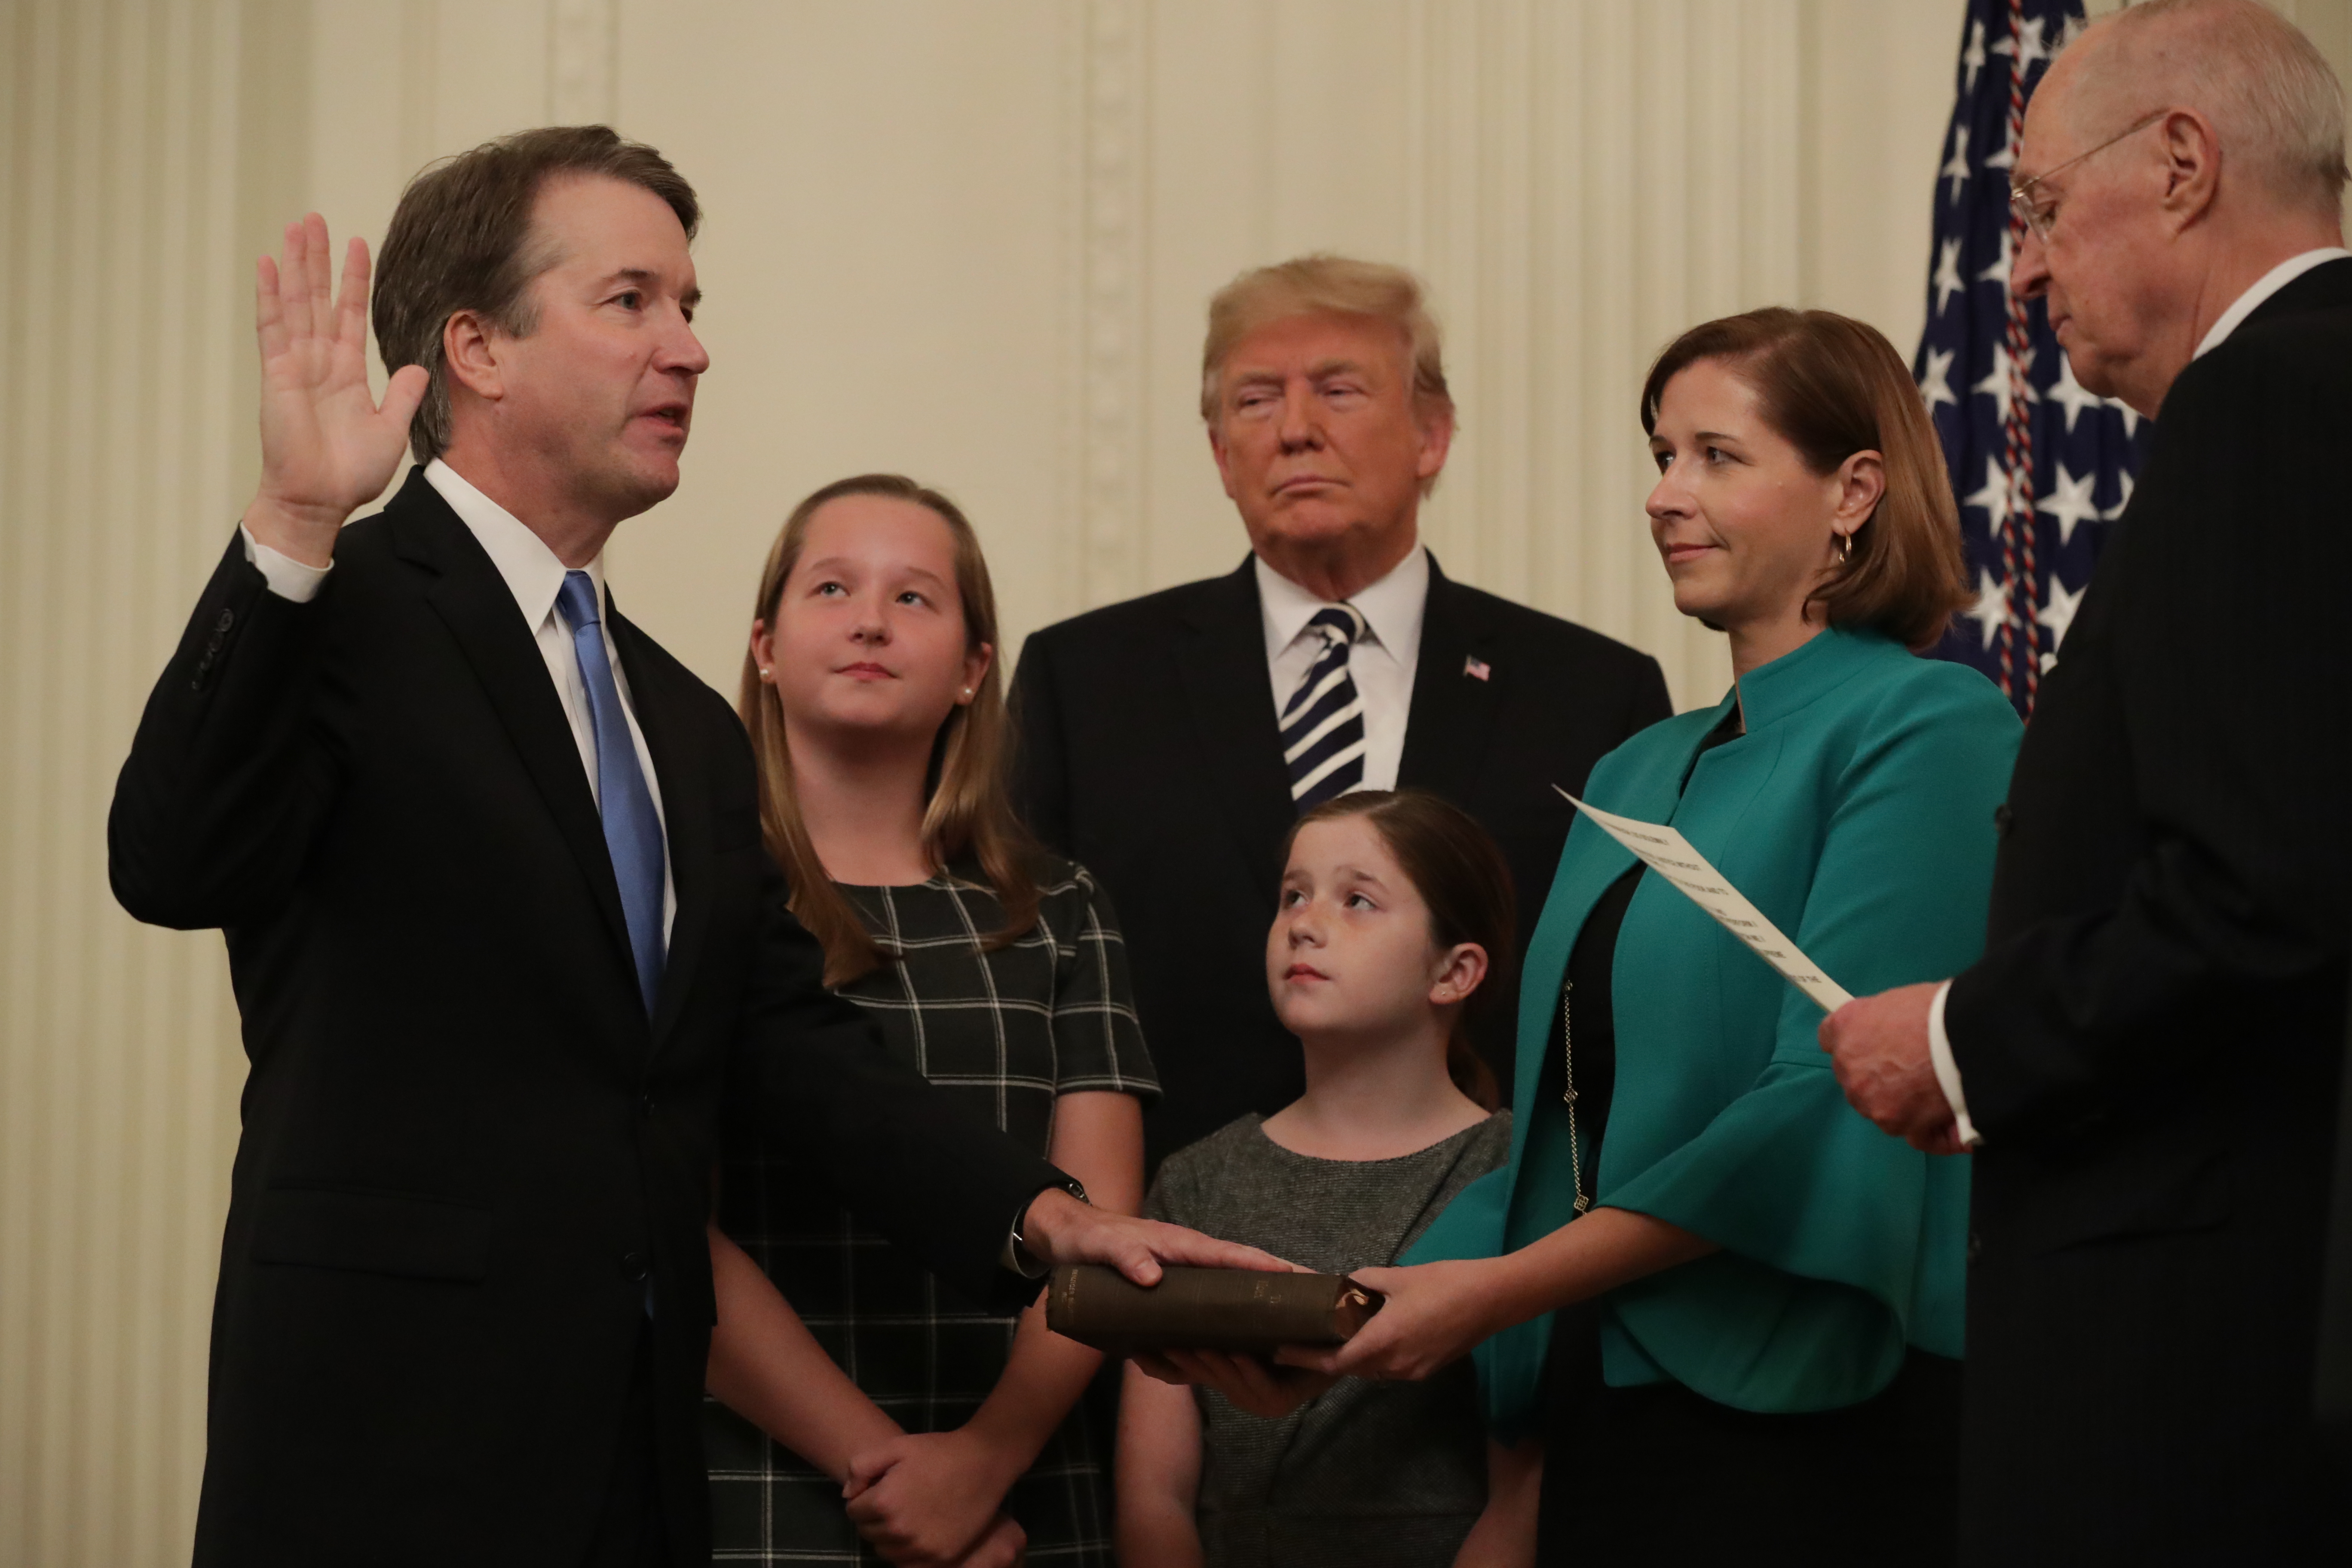 U.S. Supreme Court Justice Brett Kavanaugh (L) participates in a ceremonial swearing in by retired Justice Anthony Kennedy (R) as President Donald Trump, Kavanaugh's wife Ashley, youngest daughter Liza and oldest daughter Margaret look on in the East Room of the White House October 08, 2018 in Washington, DC. Chip Somodevilla/Getty Images